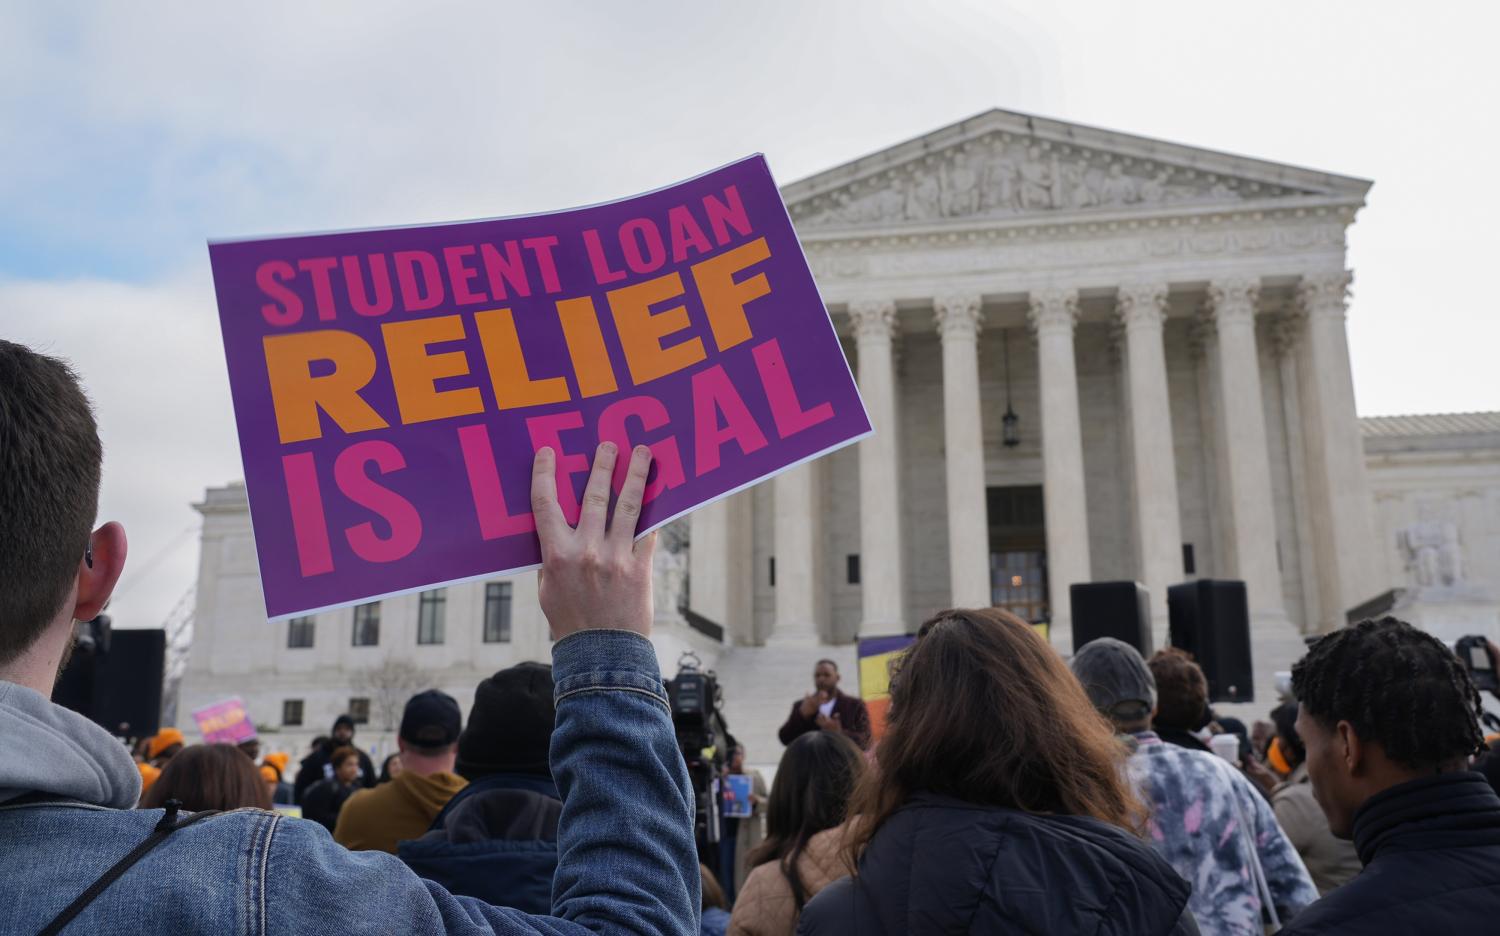 Feb 28, 2023; Washington, DC, USA; Protestors gather outside the U.S. Supreme Court ahead of the oral arguments in two cases that challenge President Joe Biden's $400 billion student loan forgiveness plan.. Mandatory Credit: Megan Smith-USA TODAY